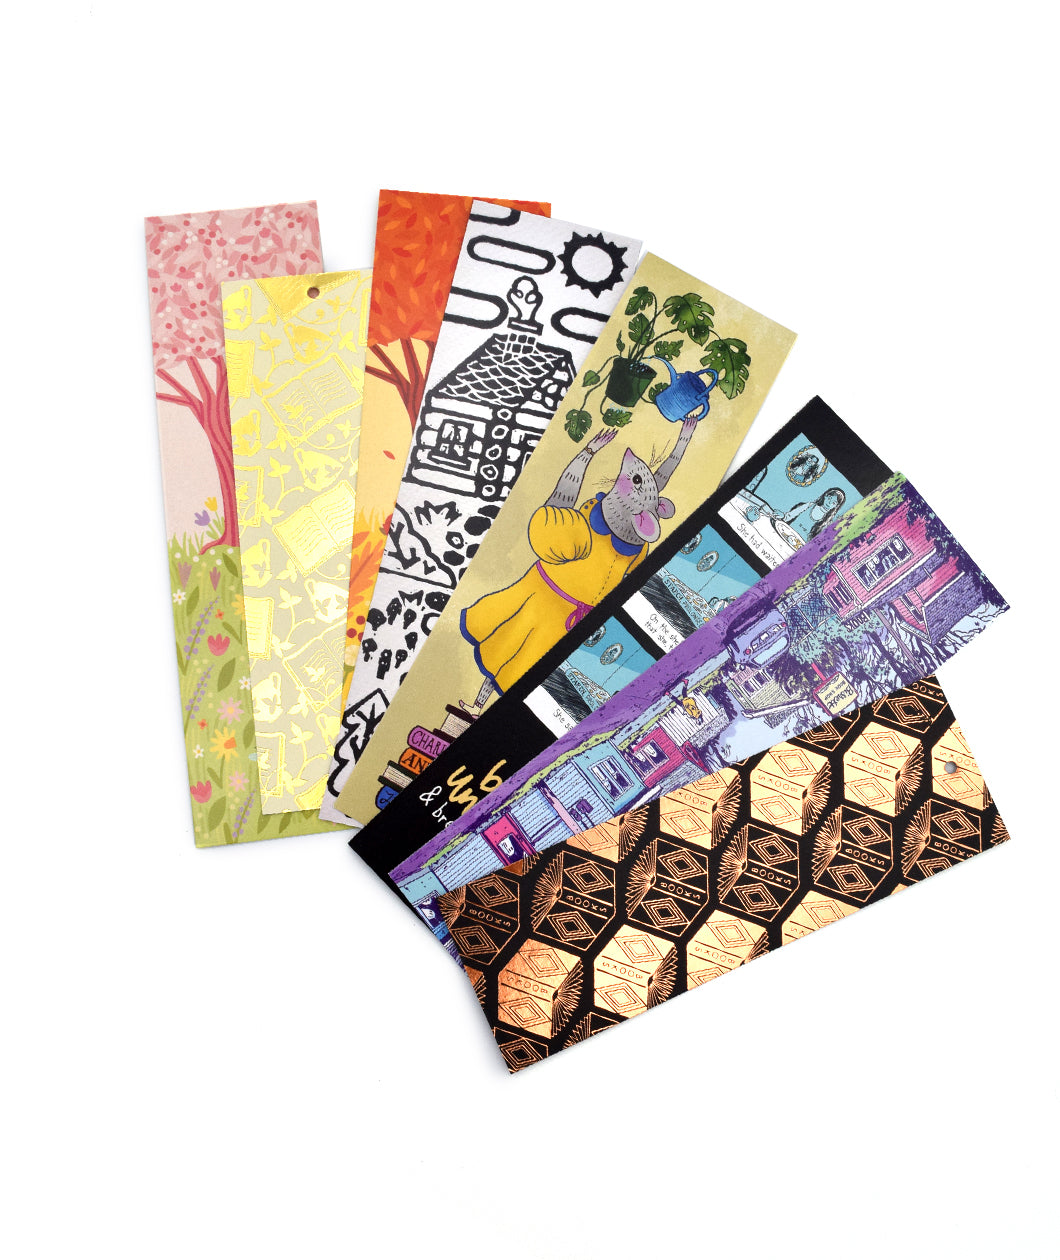 A fan of 8 different illustrated, colorful bookmarks from the Books Unbound subscription. 